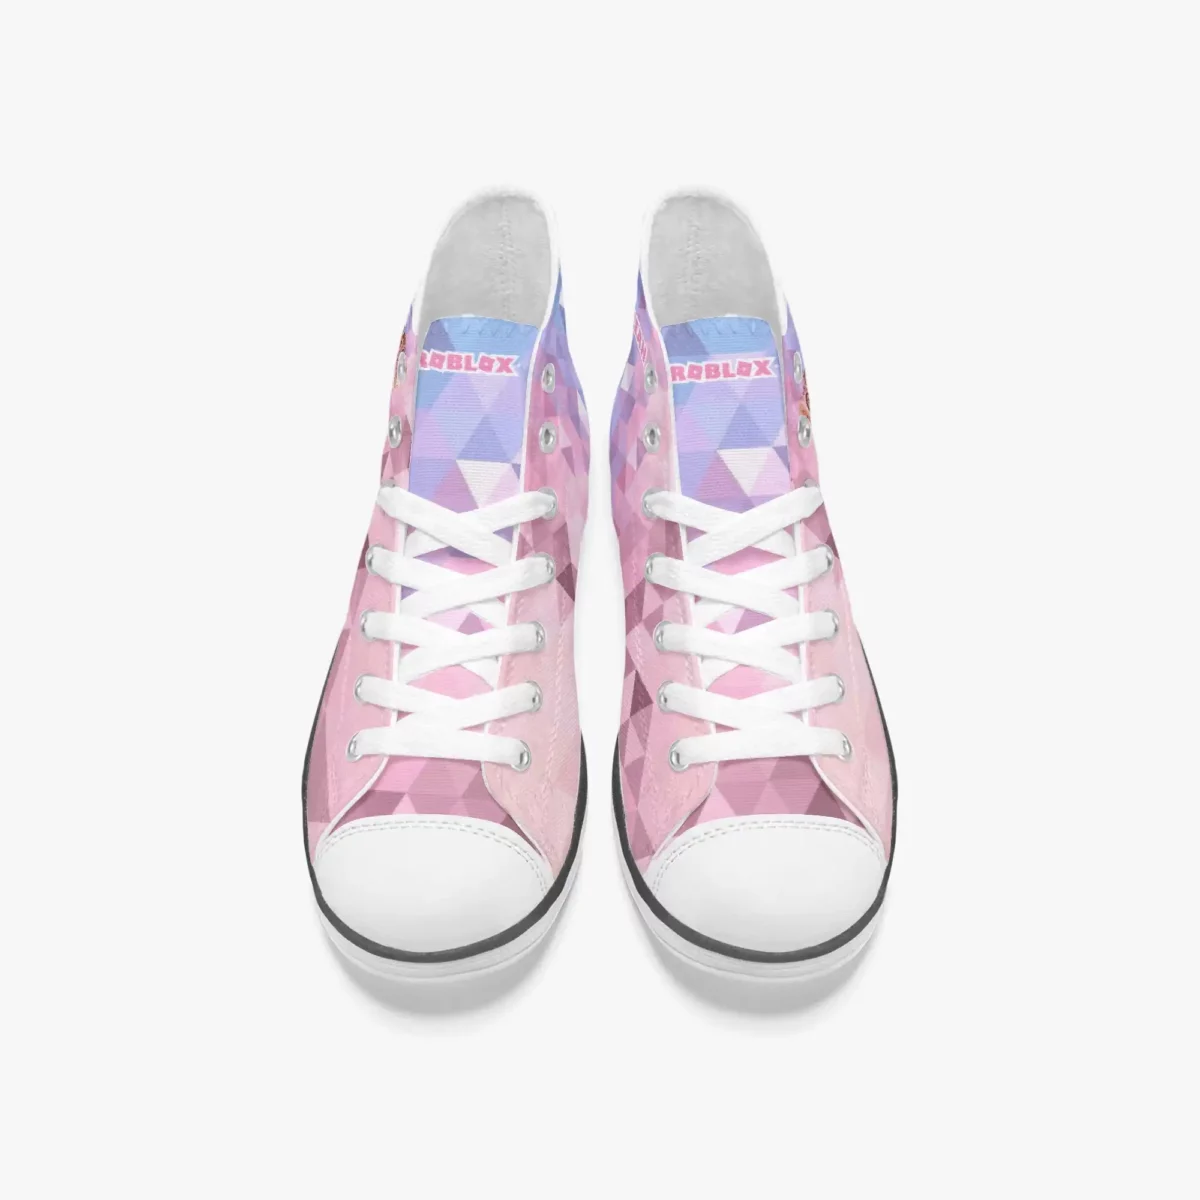 Roblox Girls Personalized High-Top Sneakers for Children – Pink and Purple geometric background Cool Kiddo 16